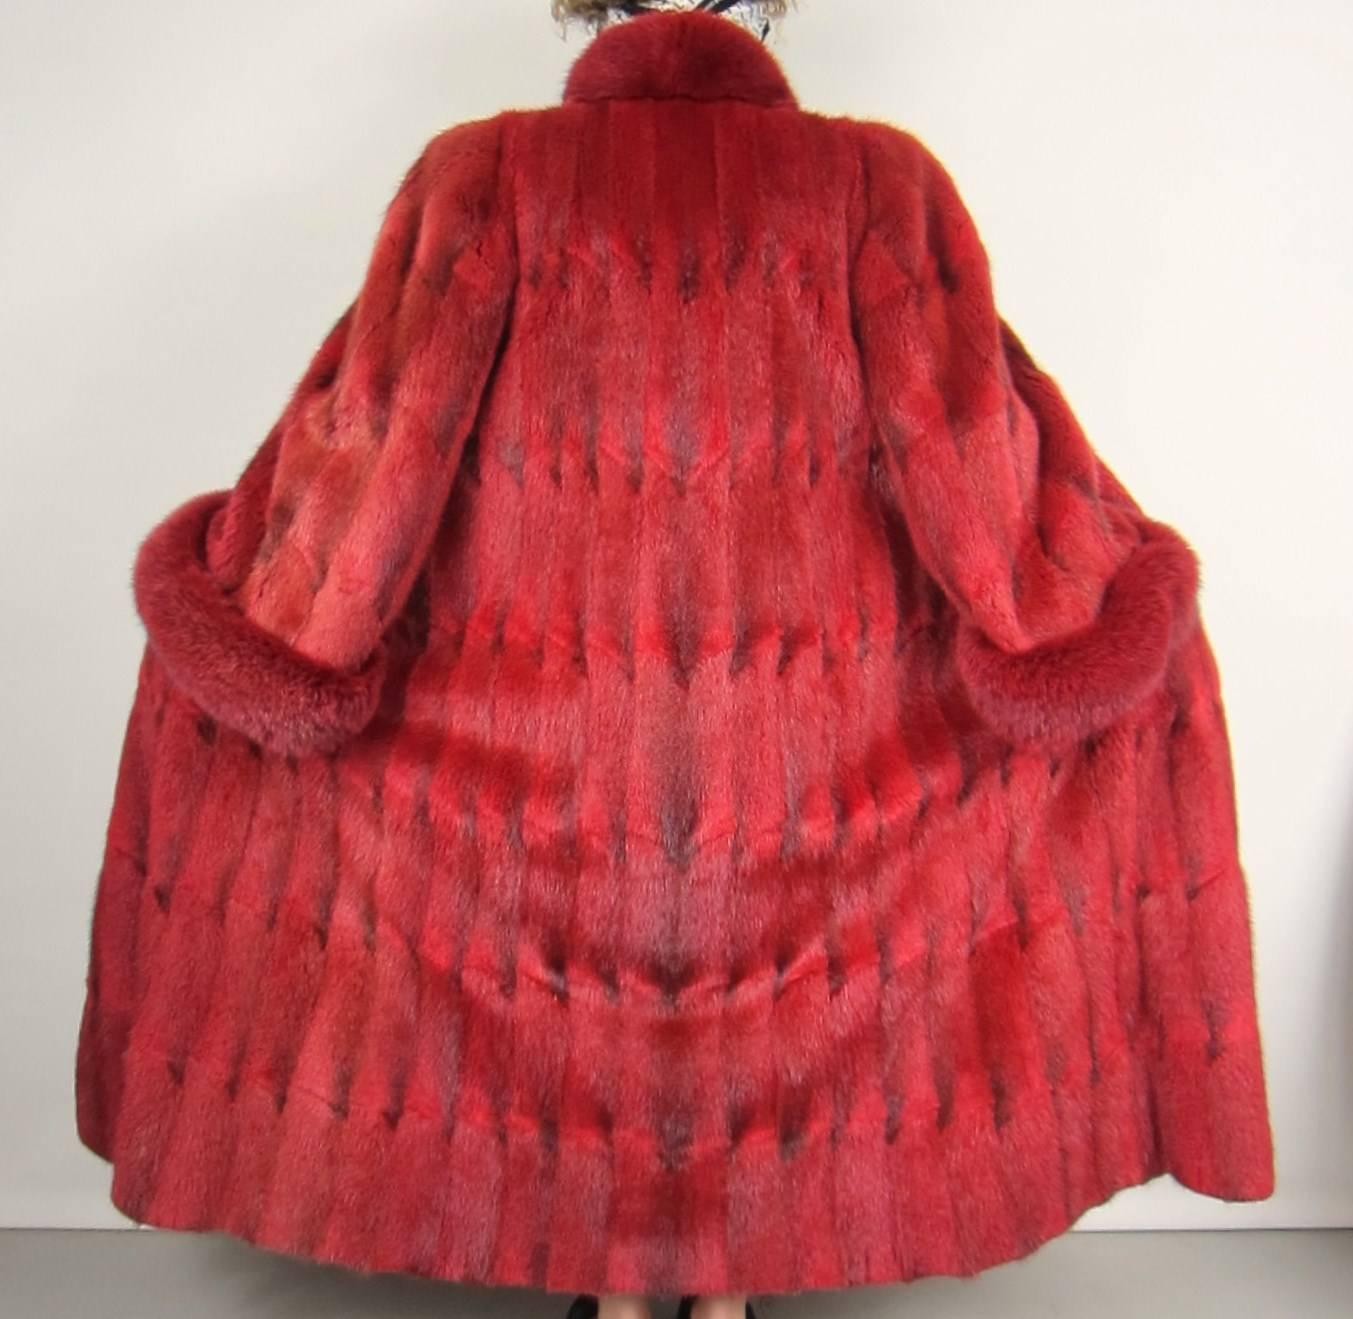 Huge swing on this sheared Oscar De La Renta Full length Fur coat. This has Huge bell Fox Trimmed Sleeves and a Fox trimmed Collar. 5 Clips down the front. 2 Slit front pockets. Measures - Bust 40 - Waist 50 - Sleeve 24 - Cuff 3 - Length 53. Will